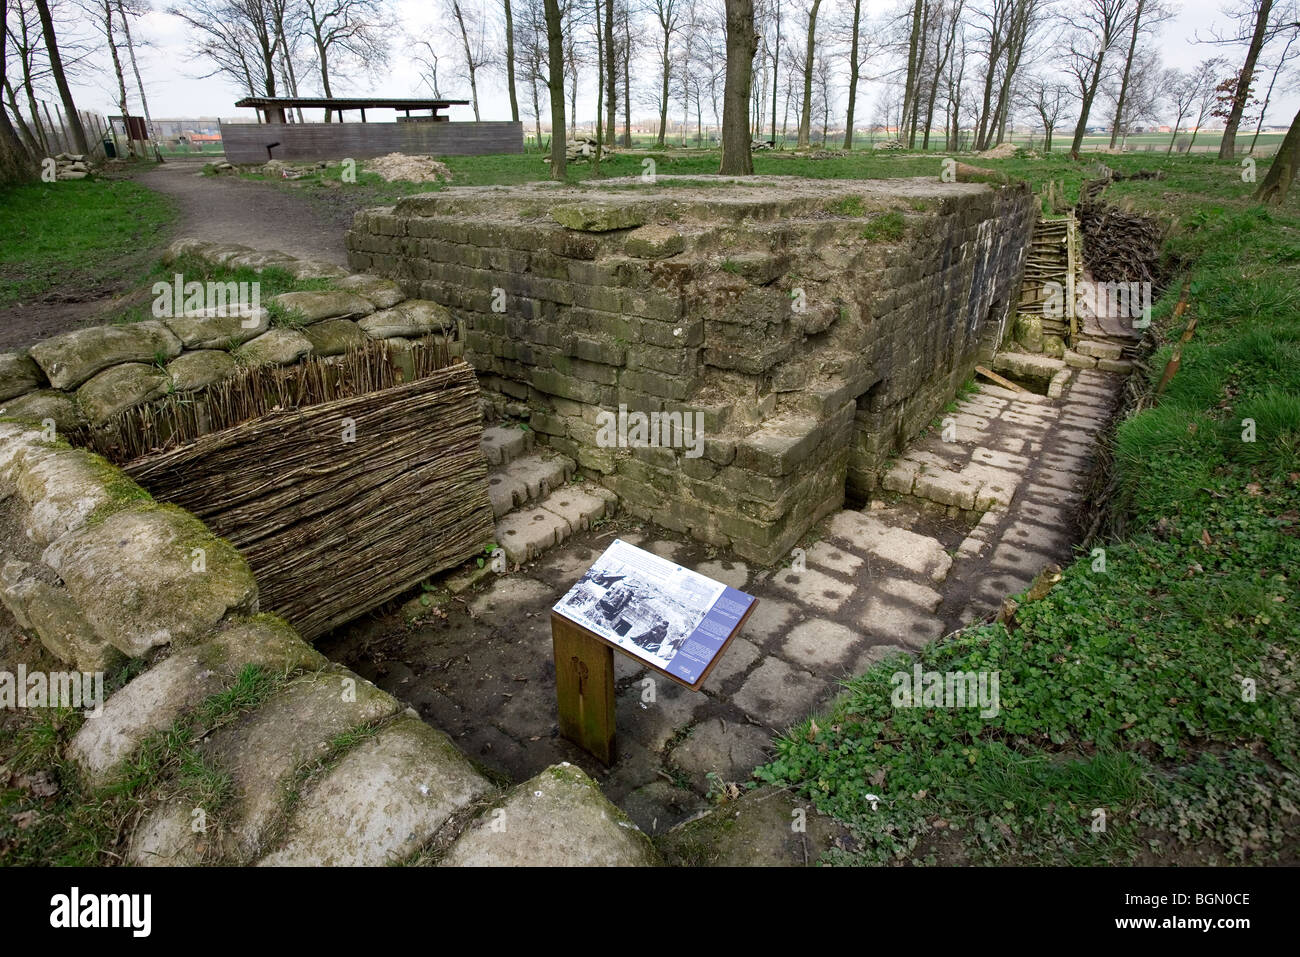 Bayernwald, a site with German WW1 trenches from the First World War at Wijtschate, Kemmel, Belgium Stock Photo